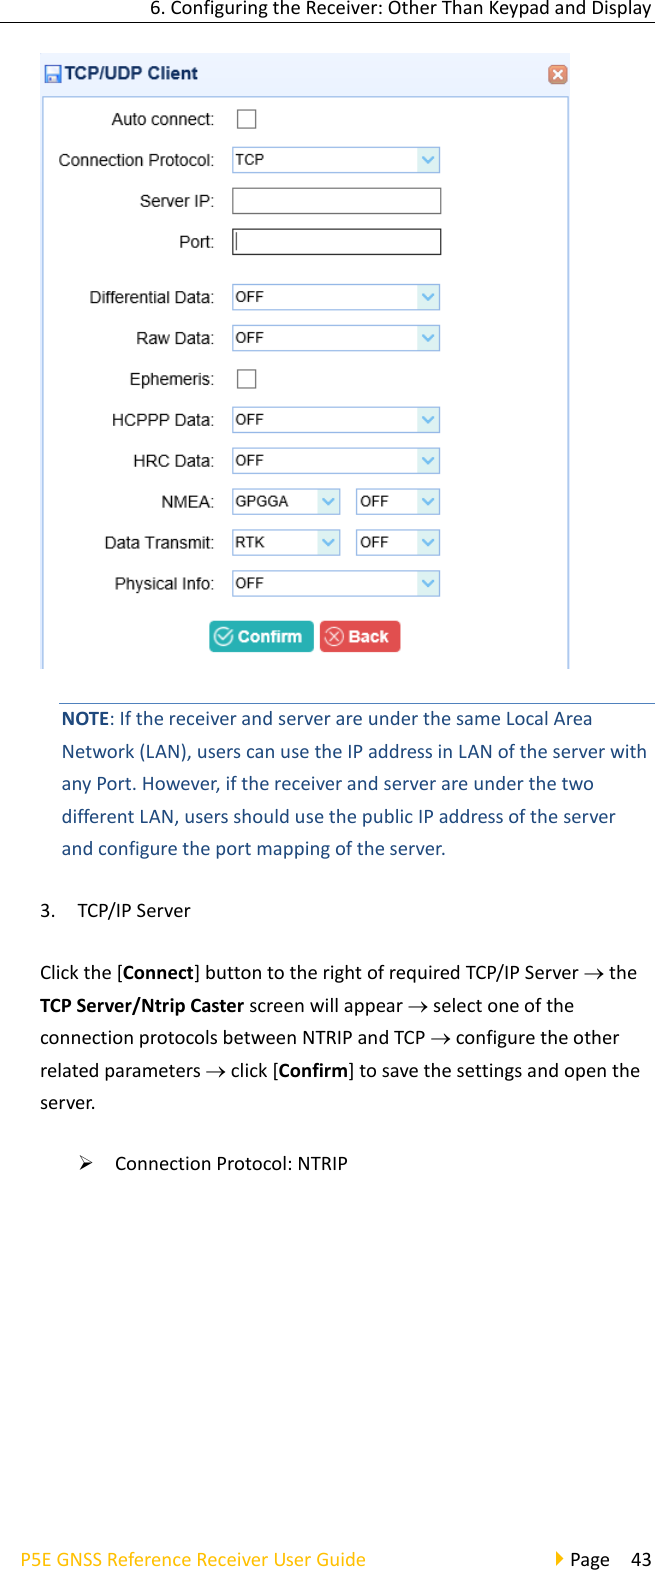 6. Configuring the Receiver: Other Than Keypad and Display P5E GNSS Reference Receiver User Guide                                     Page  43  NOTE: If the receiver and server are under the same Local Area Network (LAN), users can use the IP address in LAN of the server with any Port. However, if the receiver and server are under the two different LAN, users should use the public IP address of the server and configure the port mapping of the server. 3. TCP/IP Server Click the [Connect] button to the right of required TCP/IP Server  the TCP Server/Ntrip Caster screen will appear  select one of the connection protocols between NTRIP and TCP  configure the other related parameters  click [Confirm] to save the settings and open the server.   ➢ Connection Protocol: NTRIP 